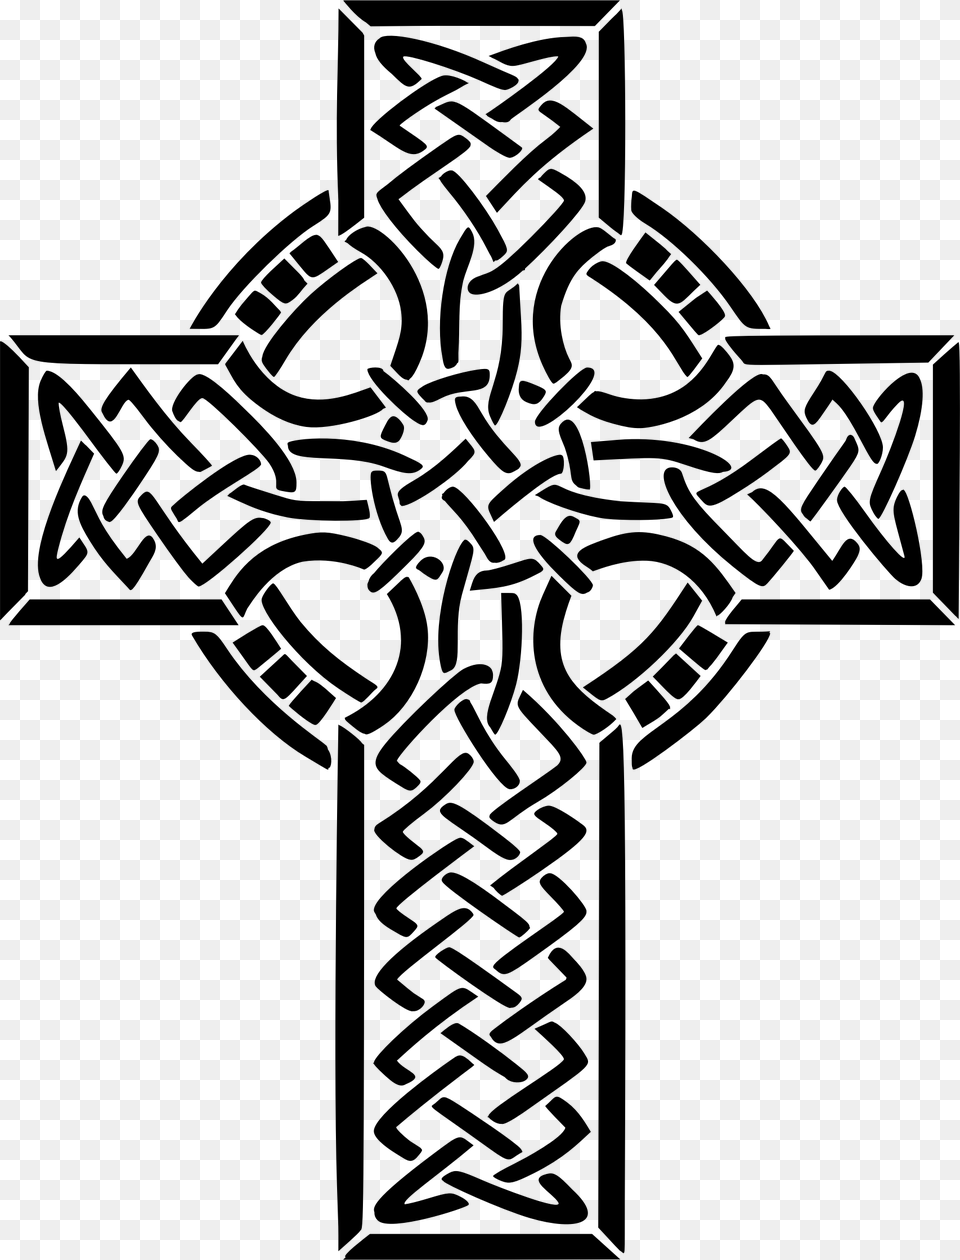 This Icons Design Of Celtic Cross 4 Optimized, Gray Free Png